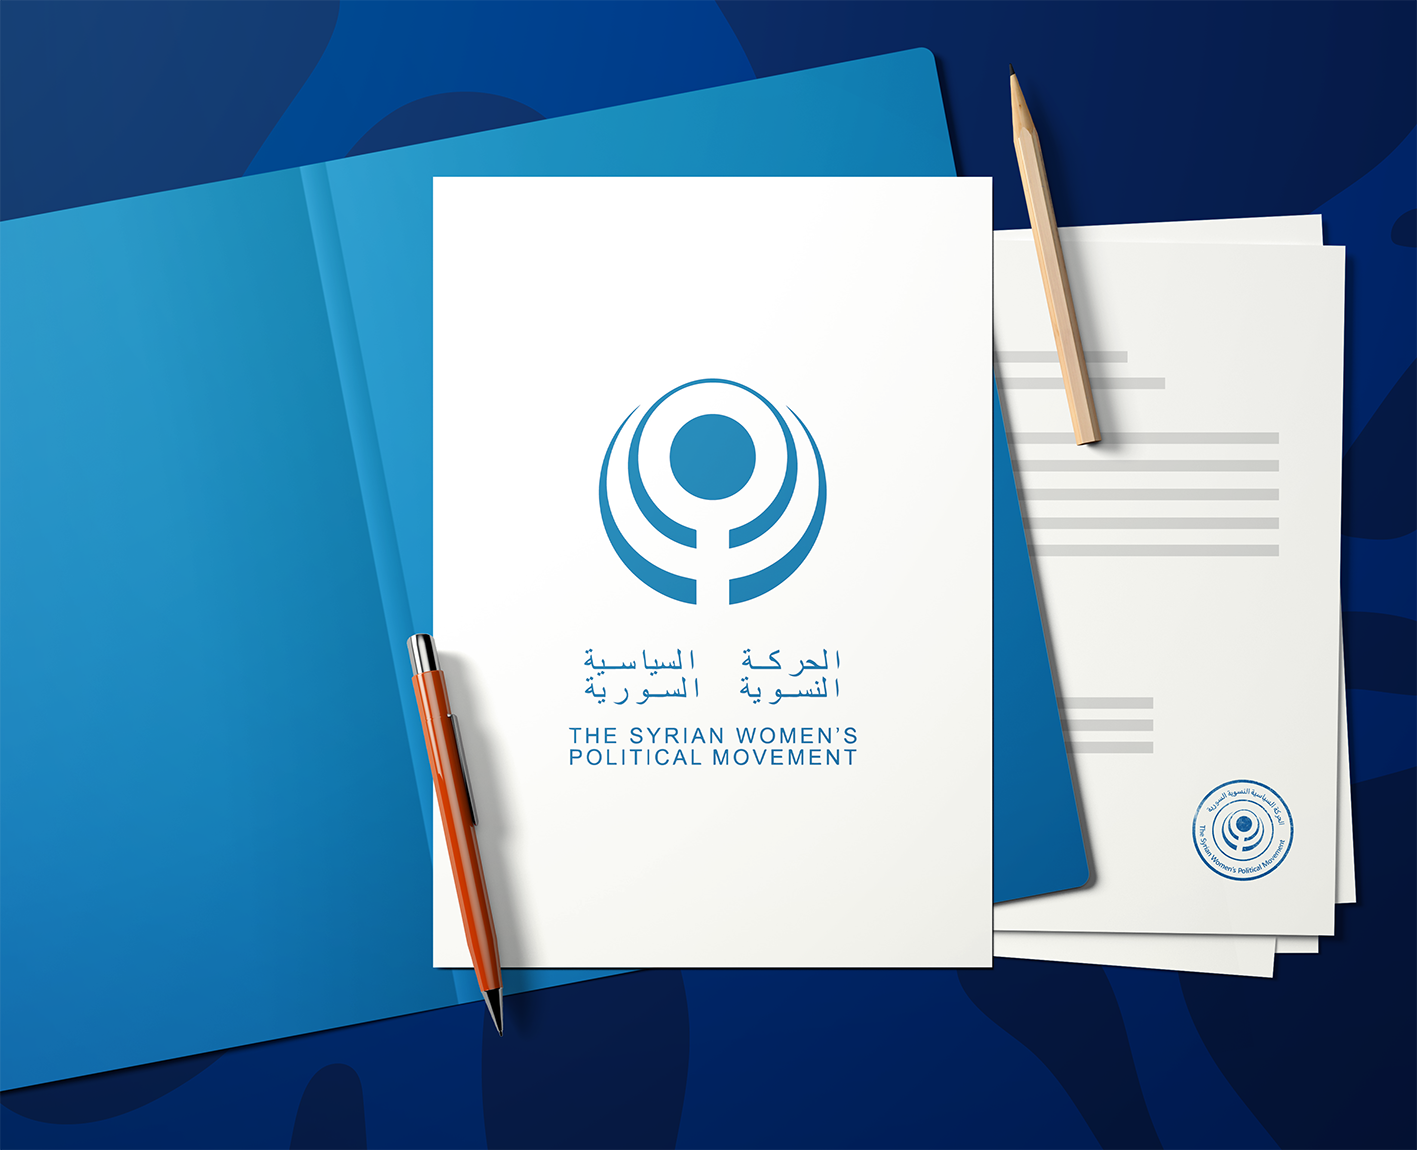 Statement by The Syrian Women Political Movement on the ninth Astana Conference